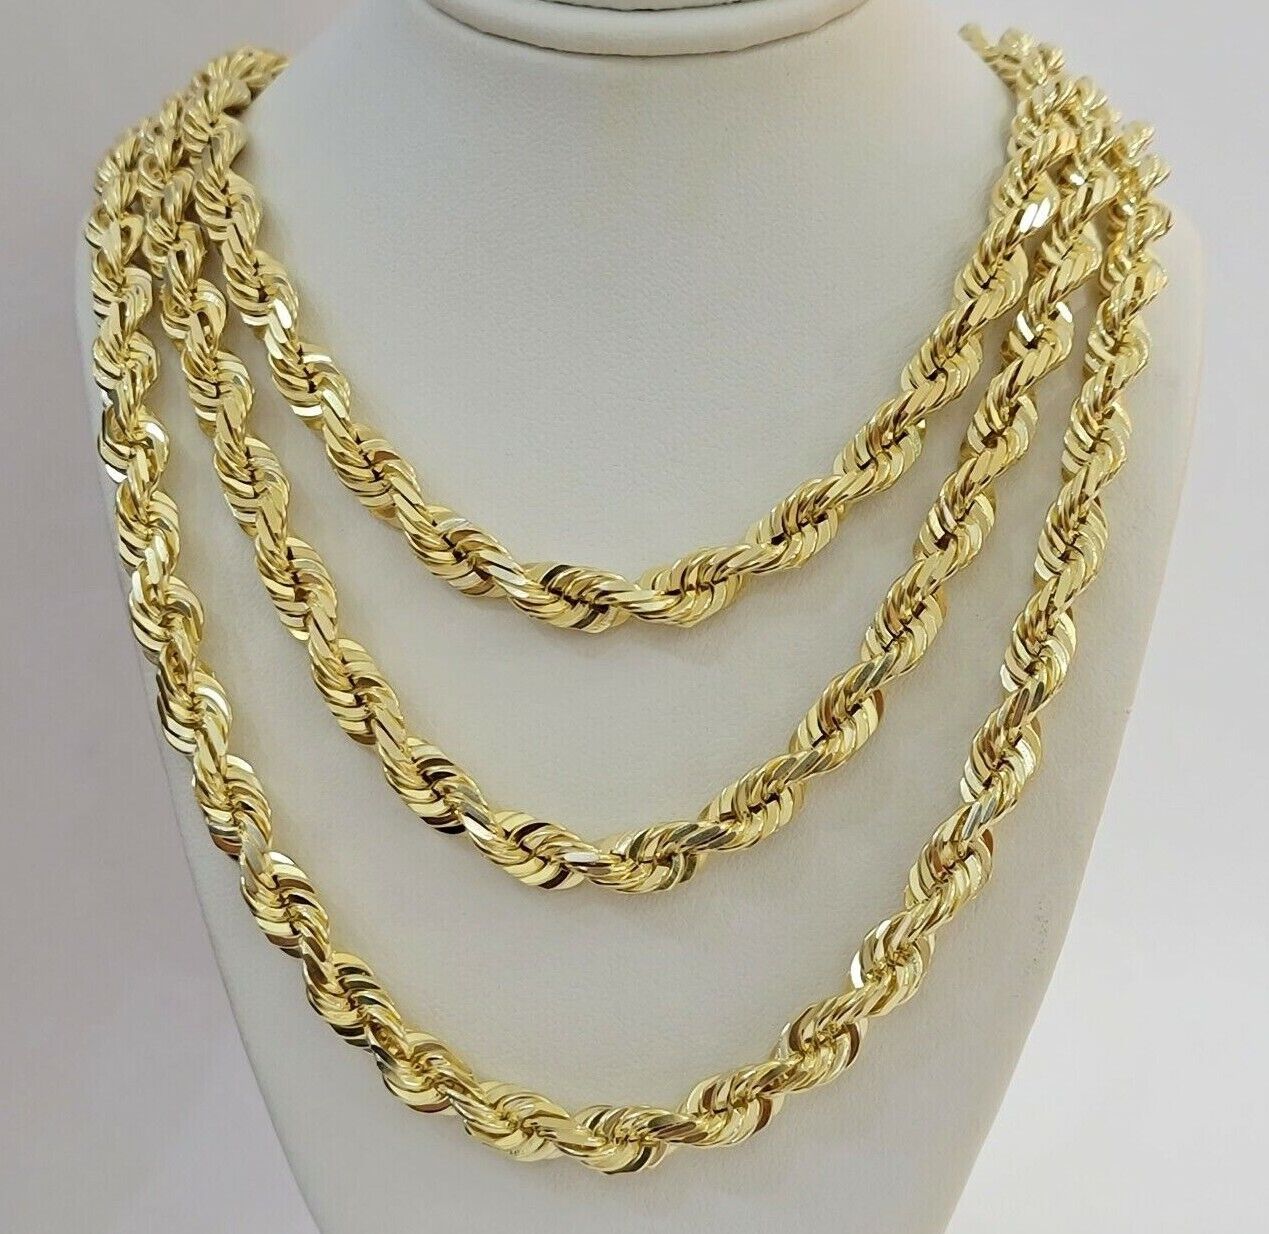 7mm Rope chain Necklace Solid 10k Yellow Gold Diamond cut 26" GURANTEED 10K GOLD